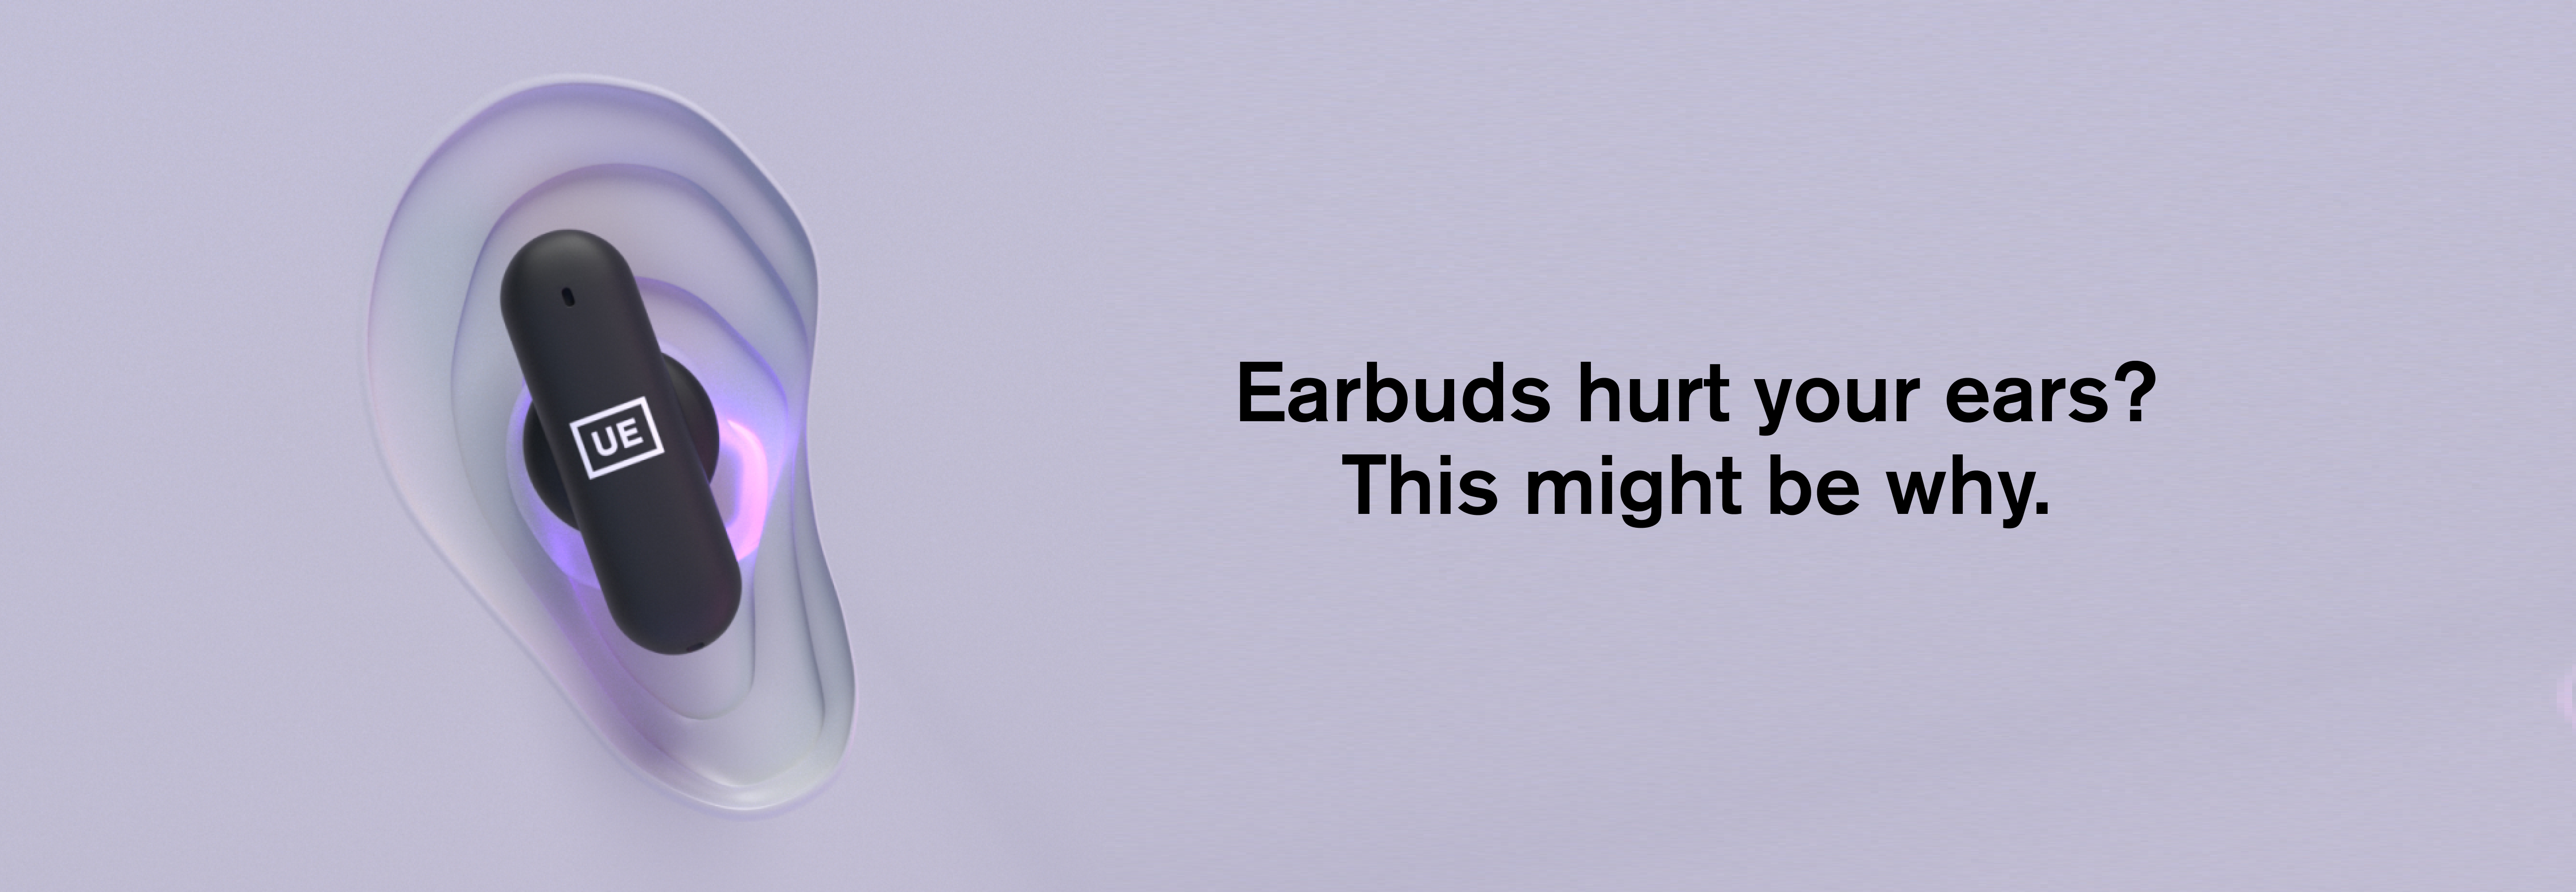 Why Do Earbuds Hurt My Ears?